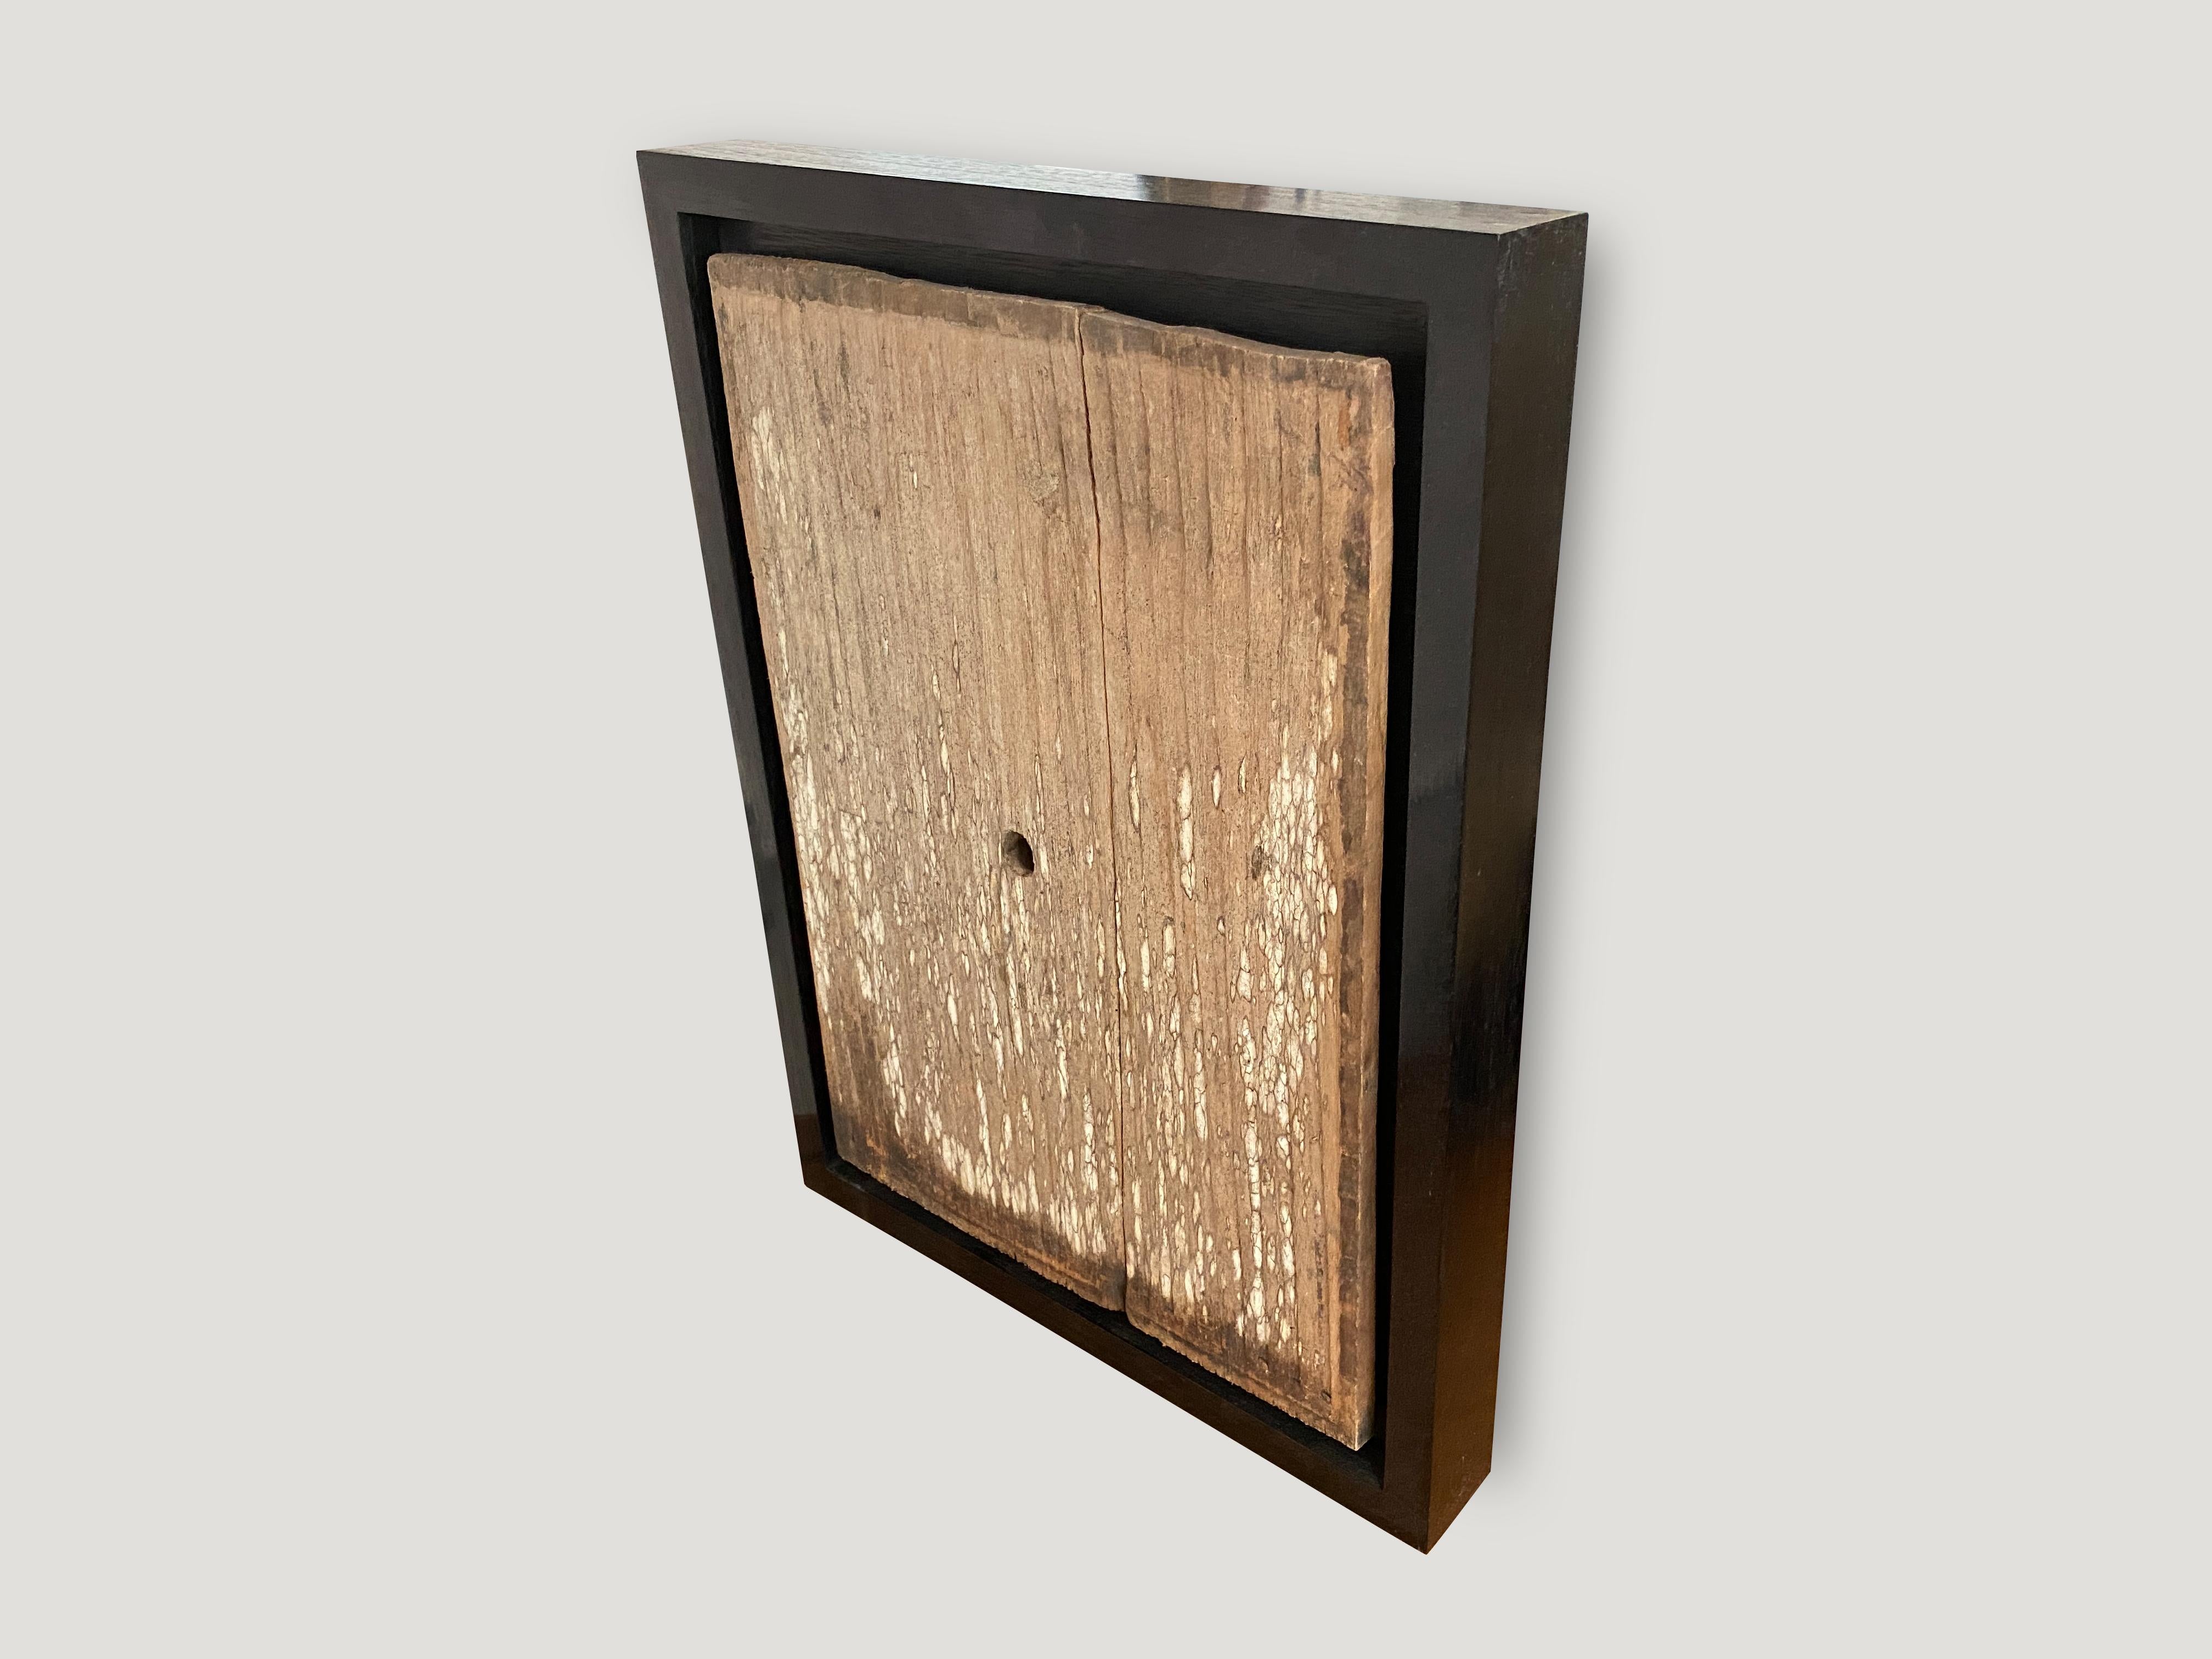 Antique hand carved panel from Toraja. Framed in a Minimalist black teak wood shadow box. This carving symbolizes the protection of the home. Great art piece.

This antique carving was sourced in the spirit of wabi-sabi, a Japanese philosophy that